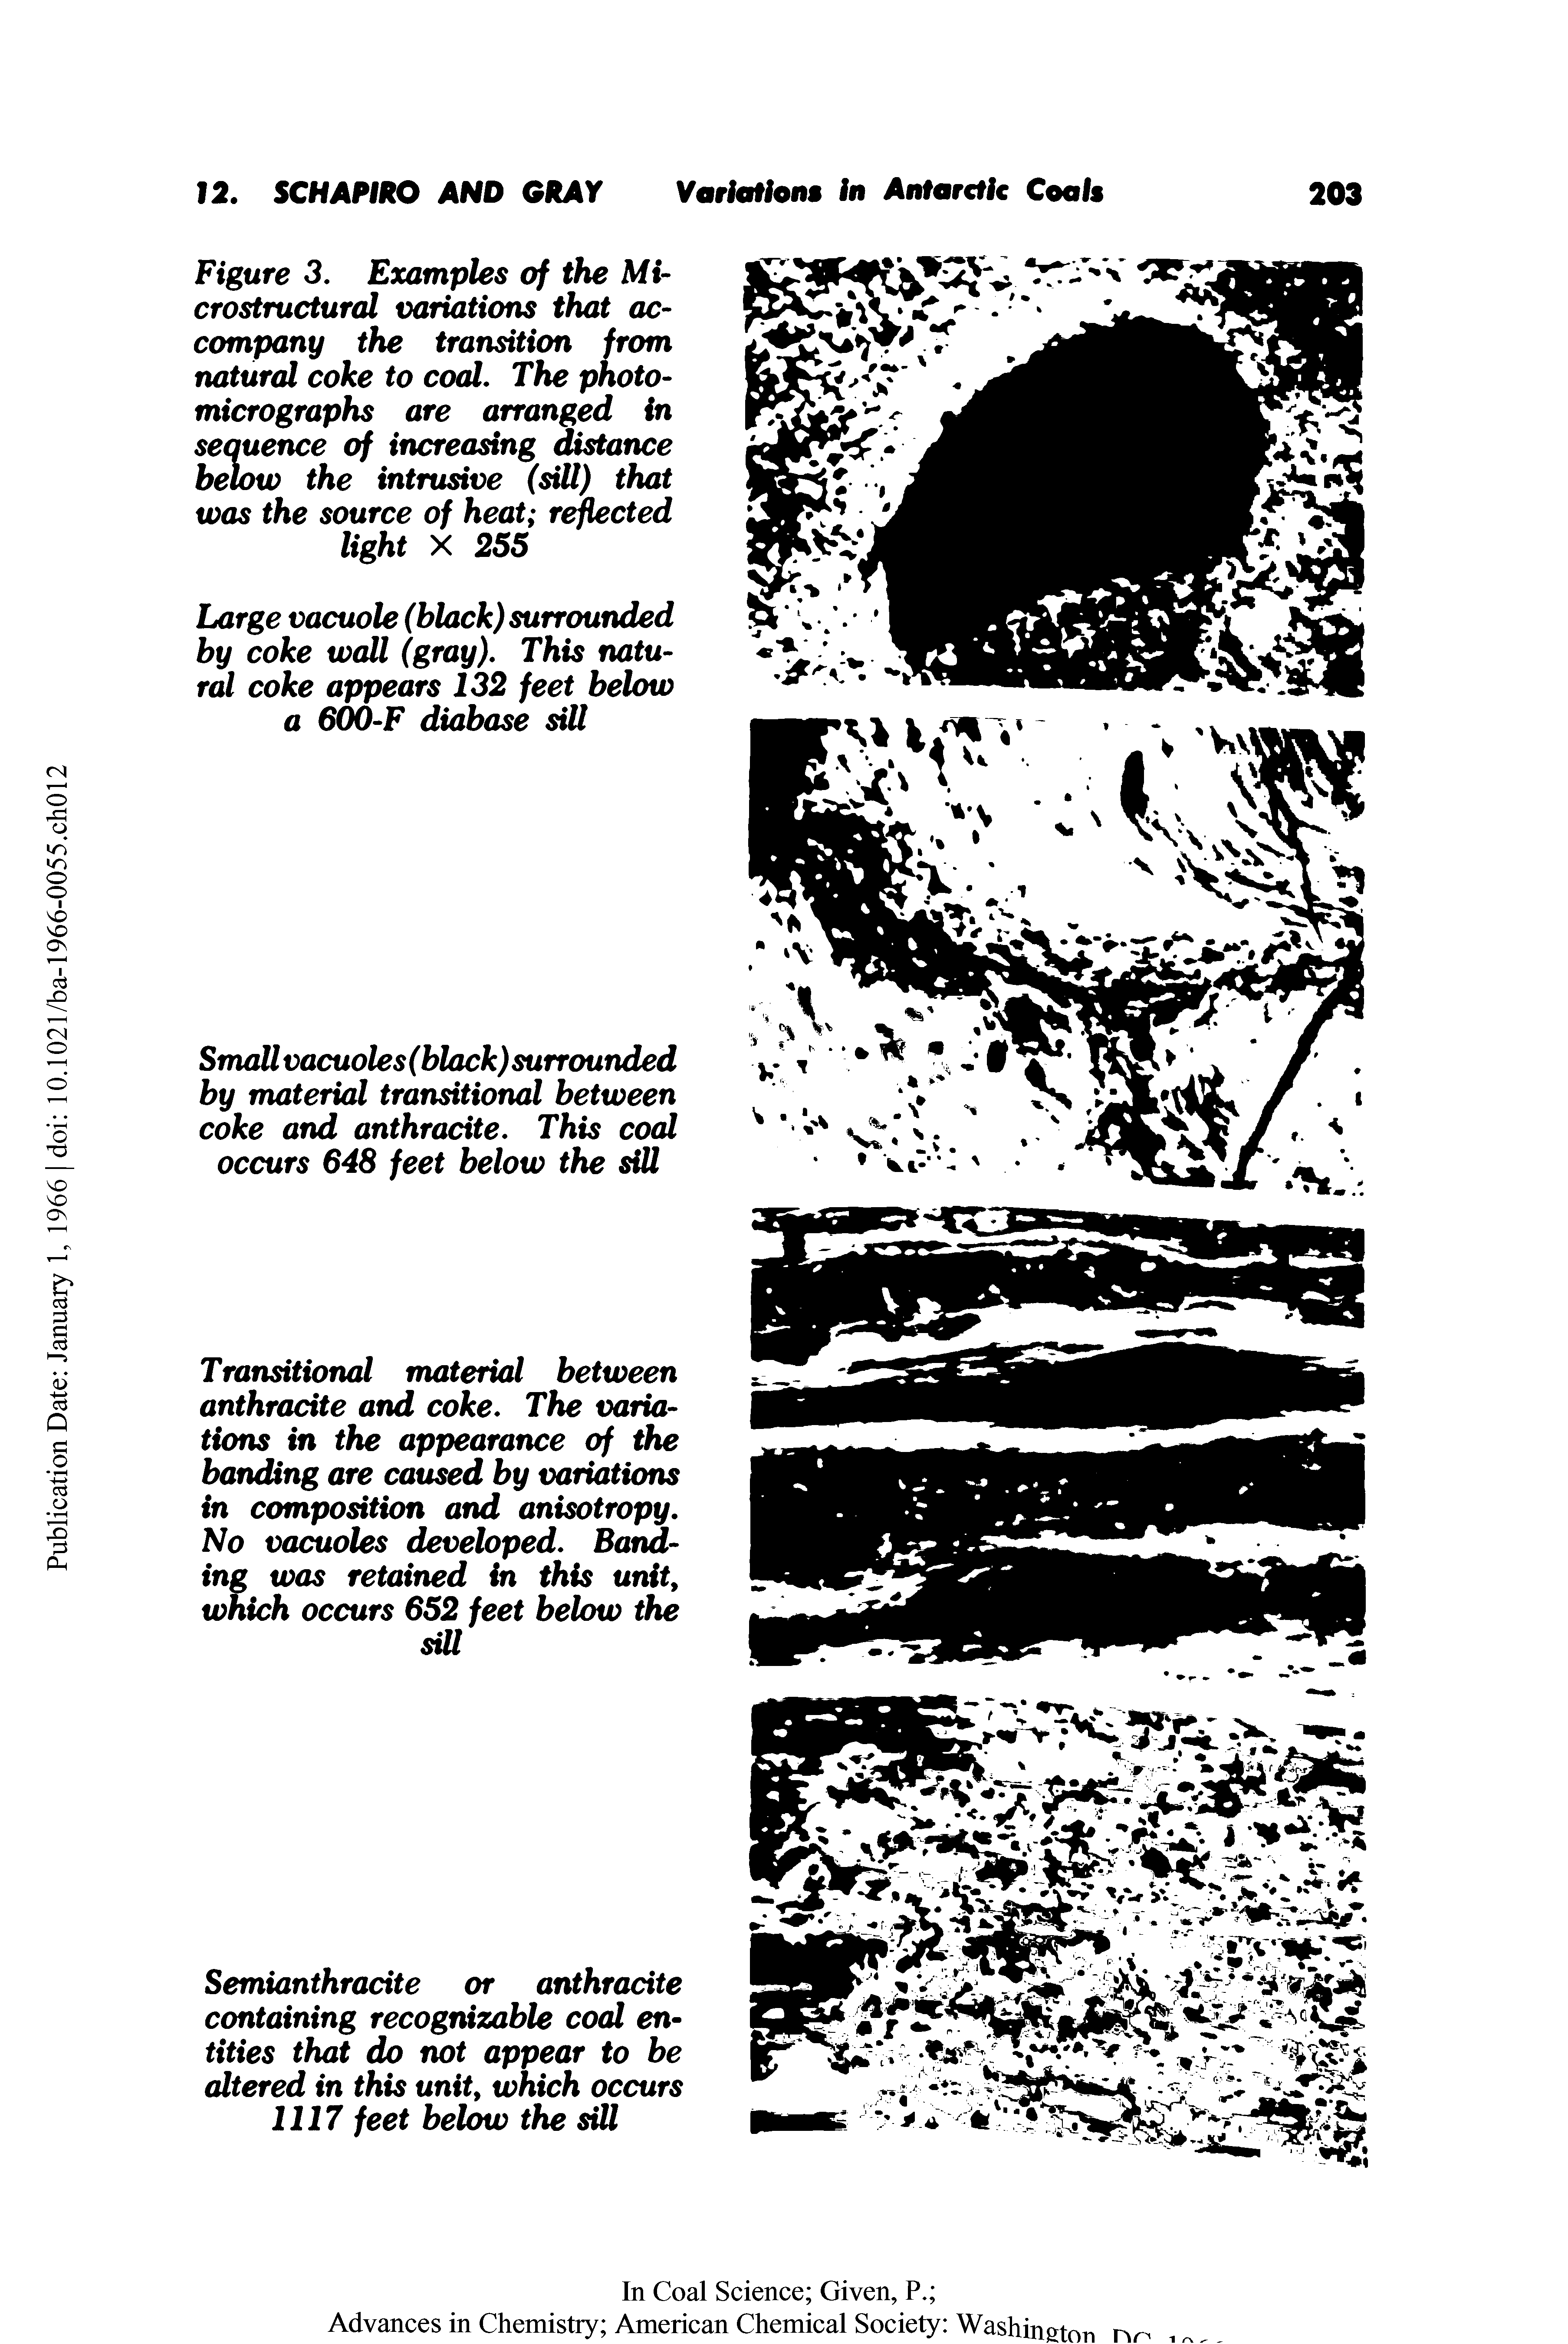 Figure 3. Examples of the Mi-crostructural variations that accompany the transition from natural coke to coal. The photomicrographs are arranged in sequence of increasing distance below the intrusive (sill) that was the source of heat reflected light X 255...